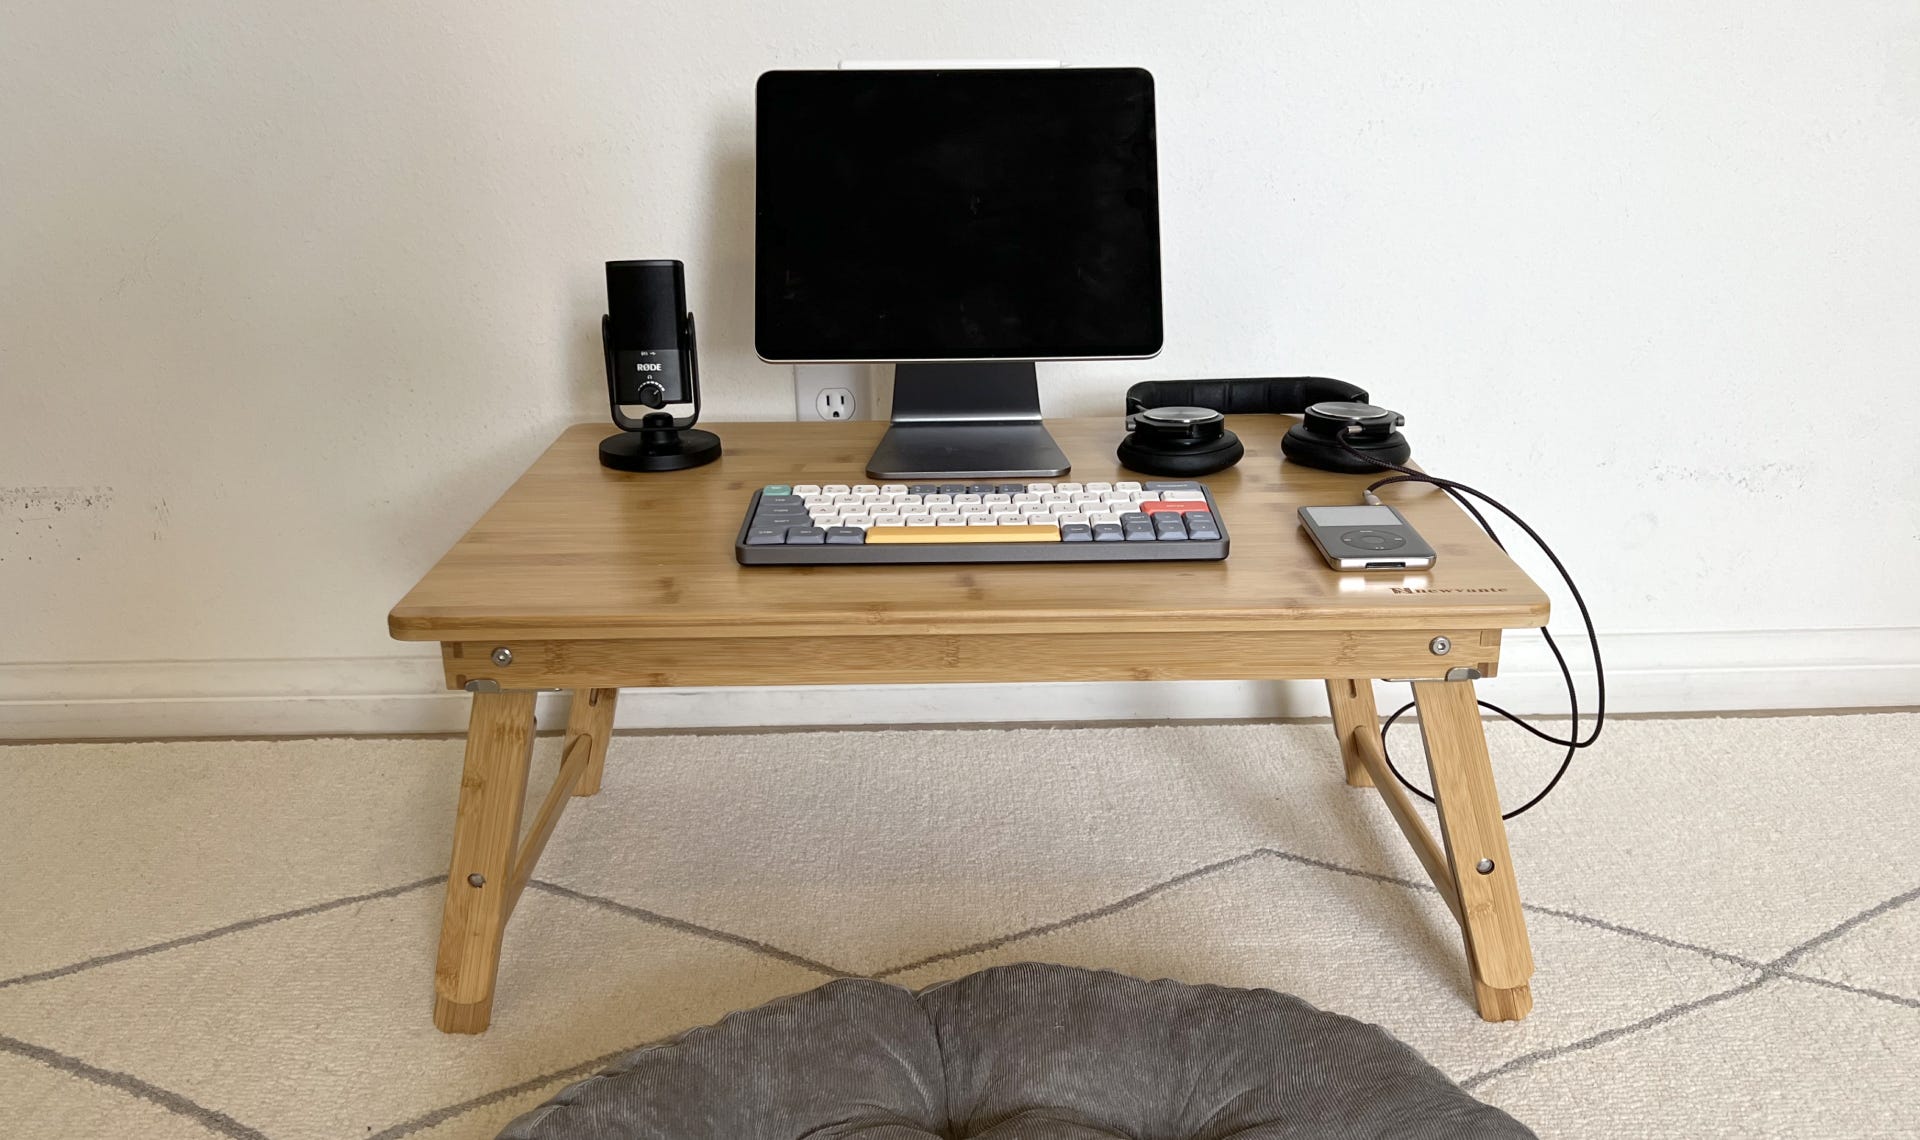 Bamboo desk with devices on top of it